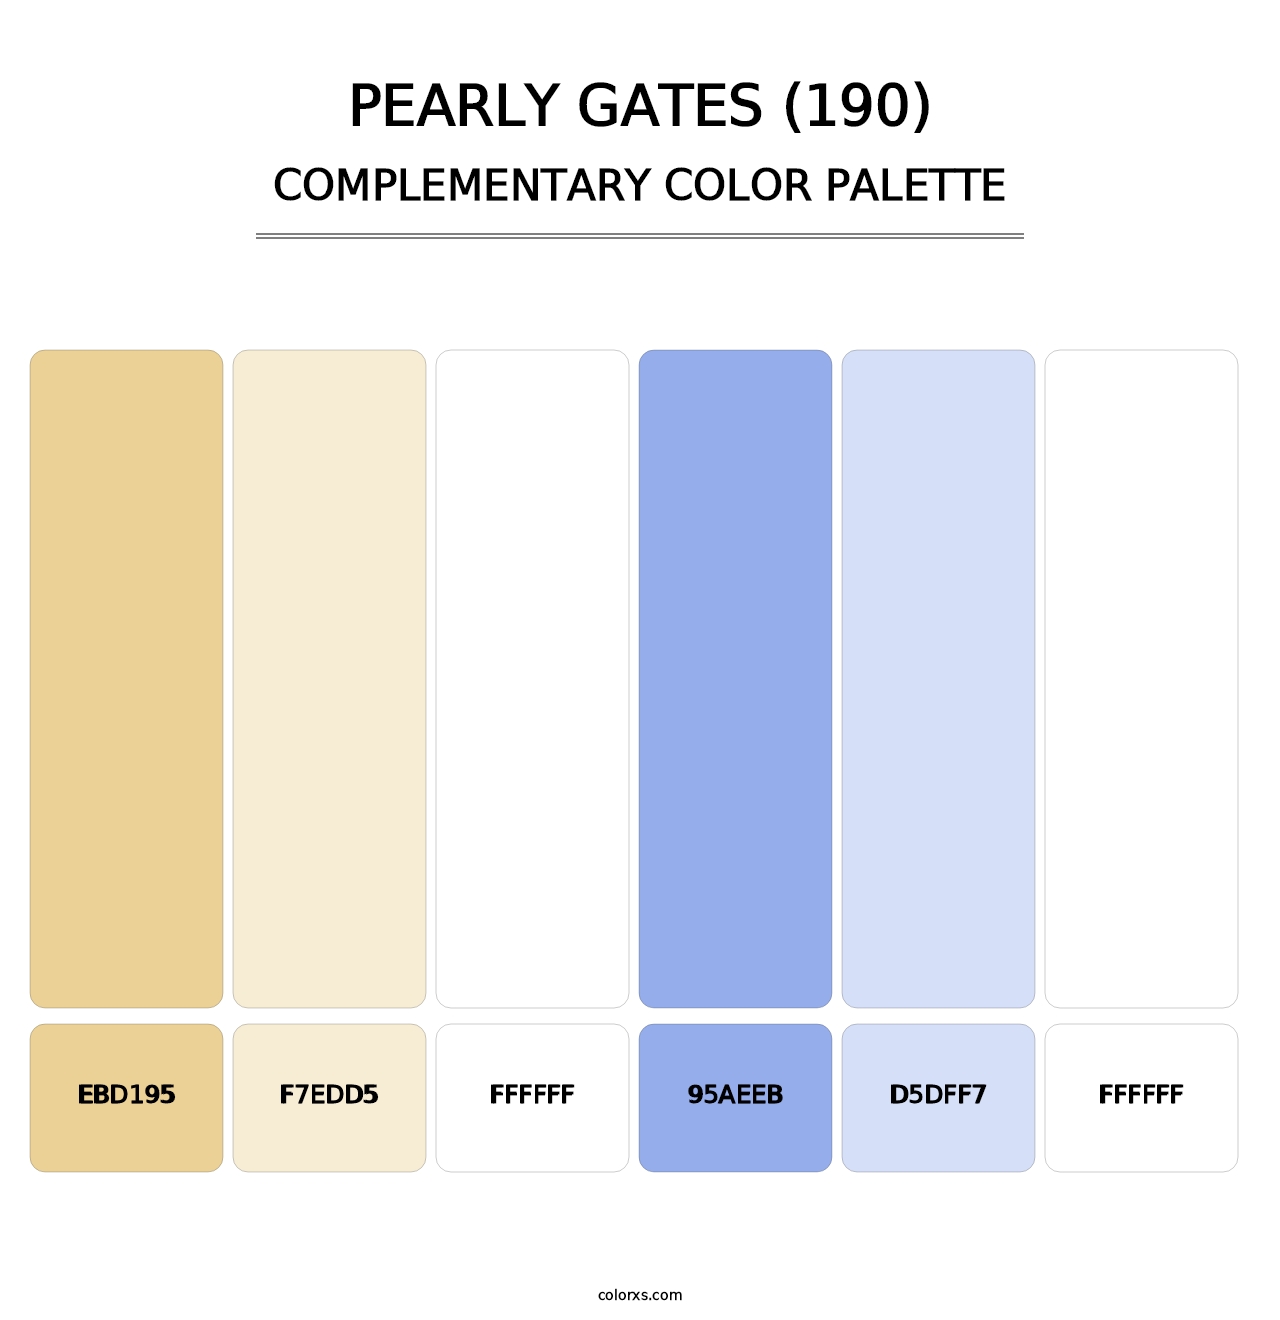 Pearly Gates (190) - Complementary Color Palette